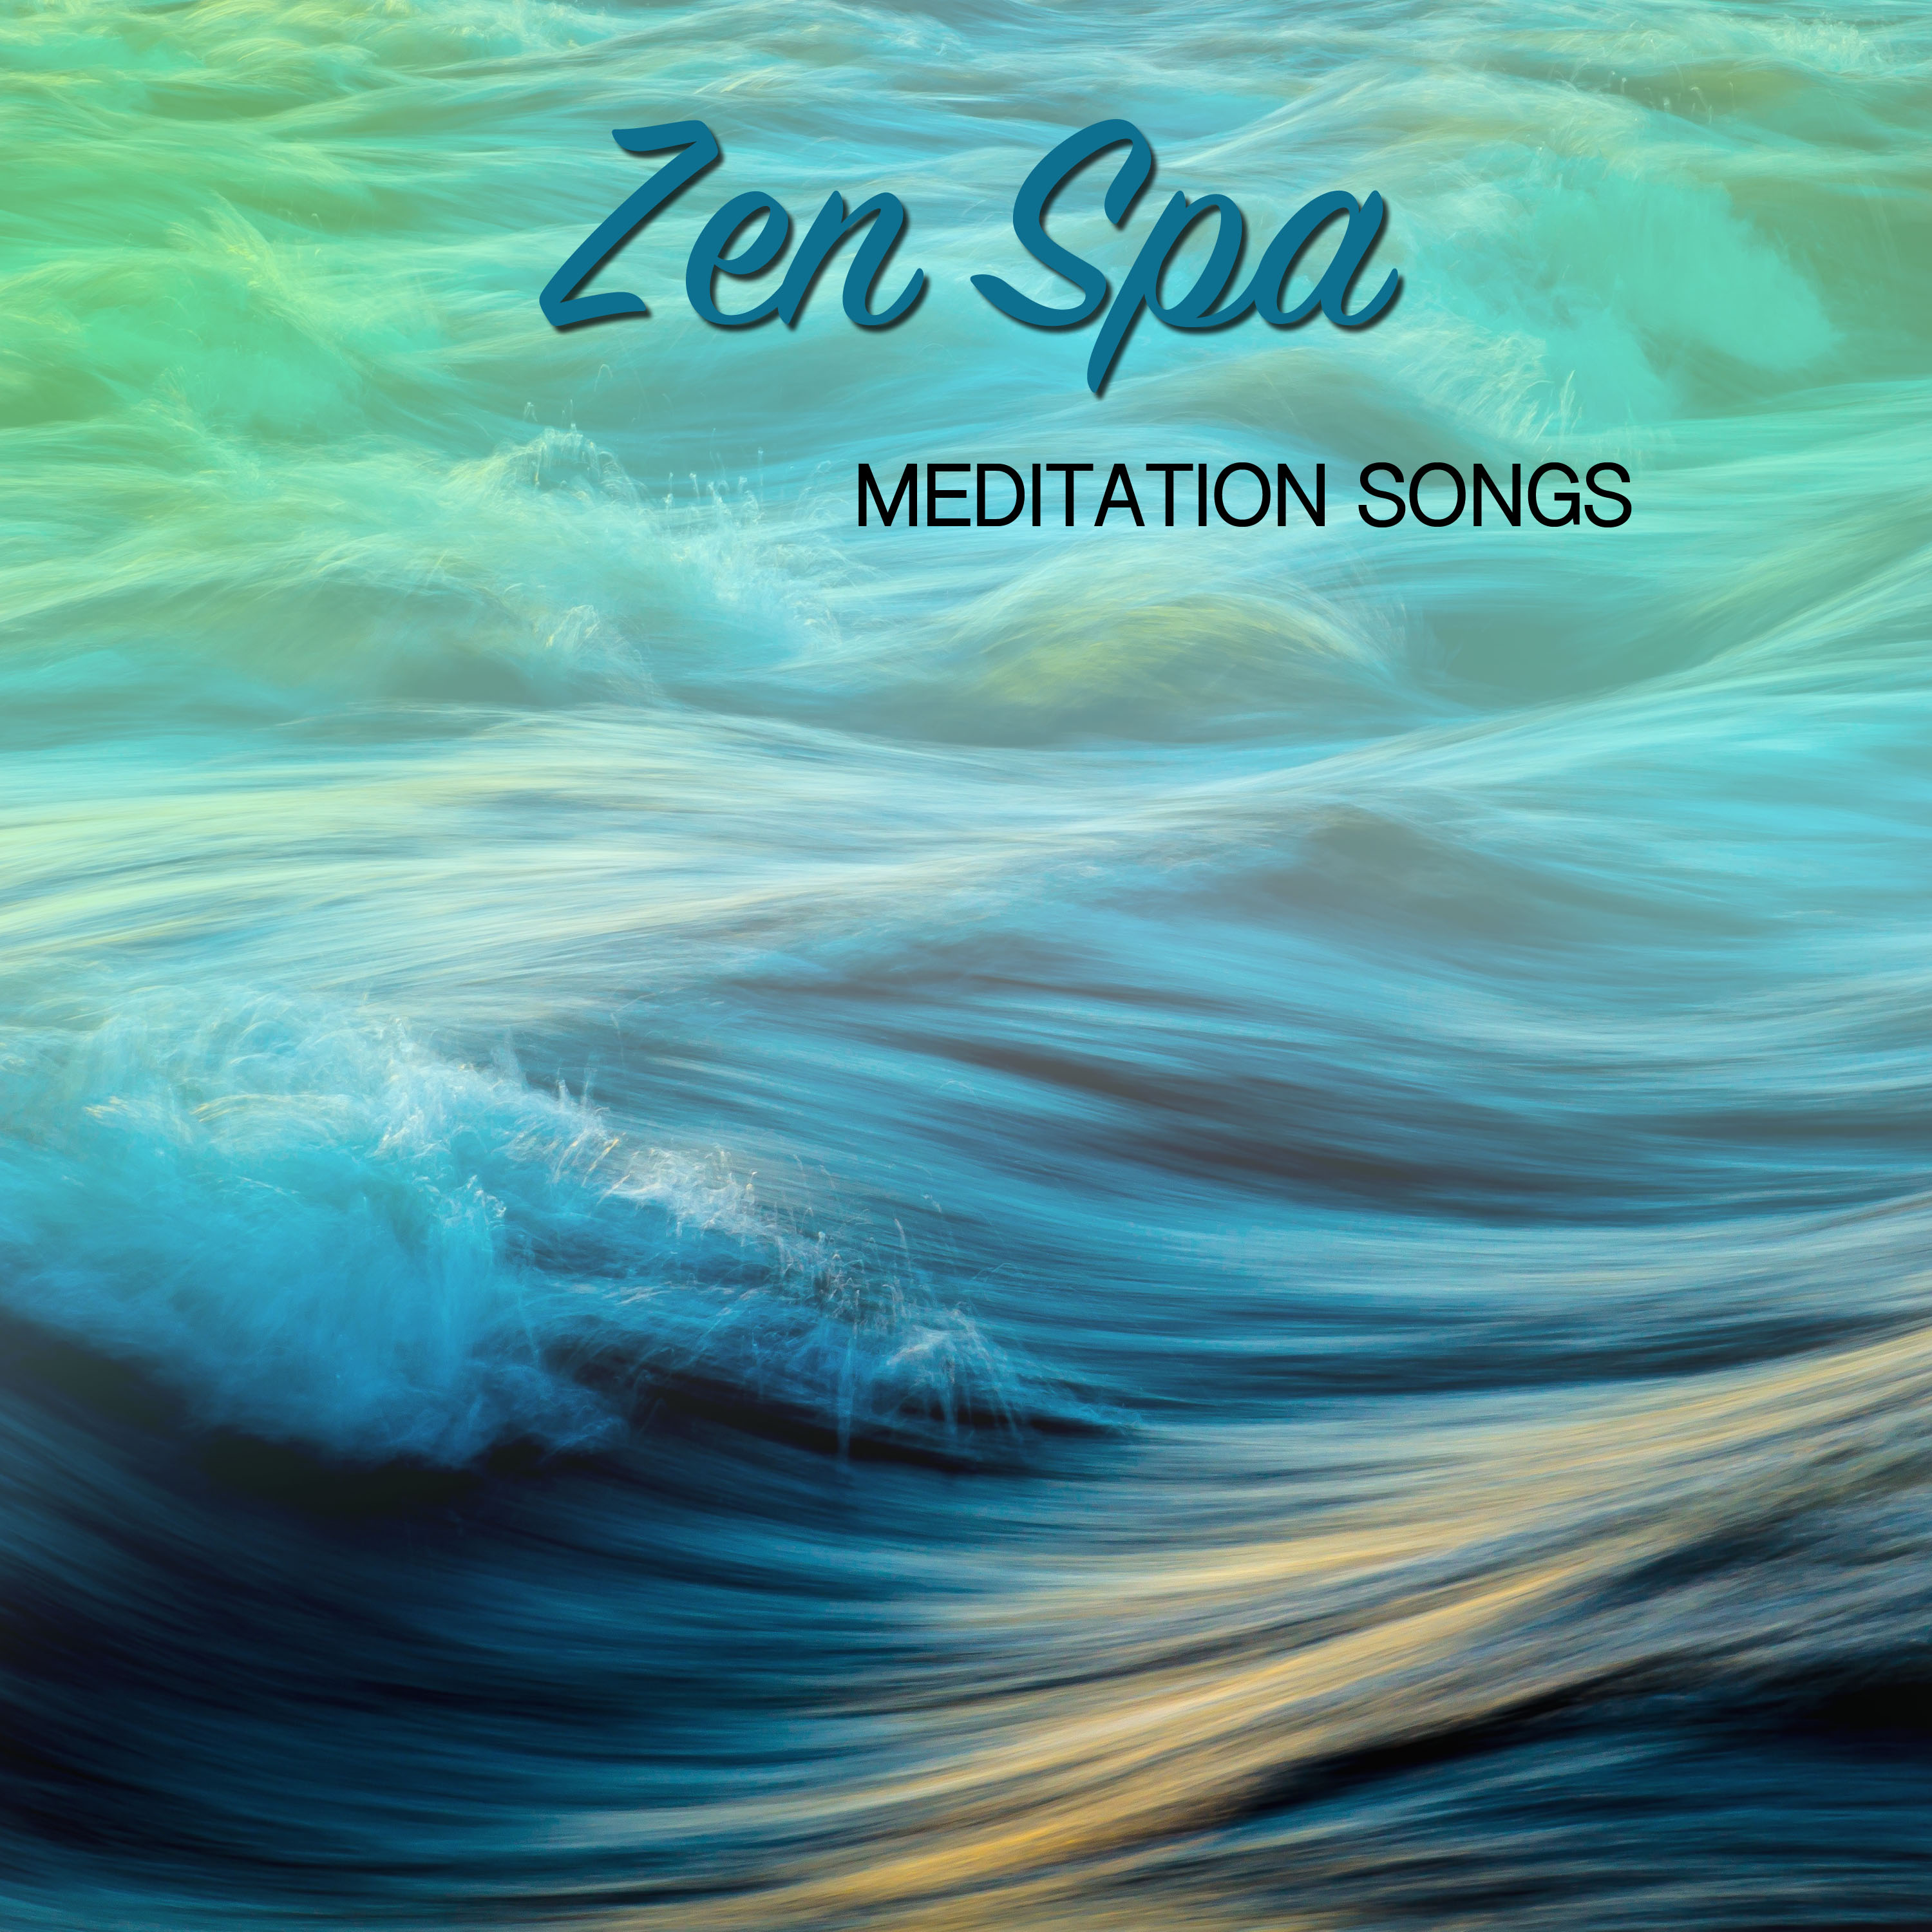 25 Background Zen Spa and Meditation Songs